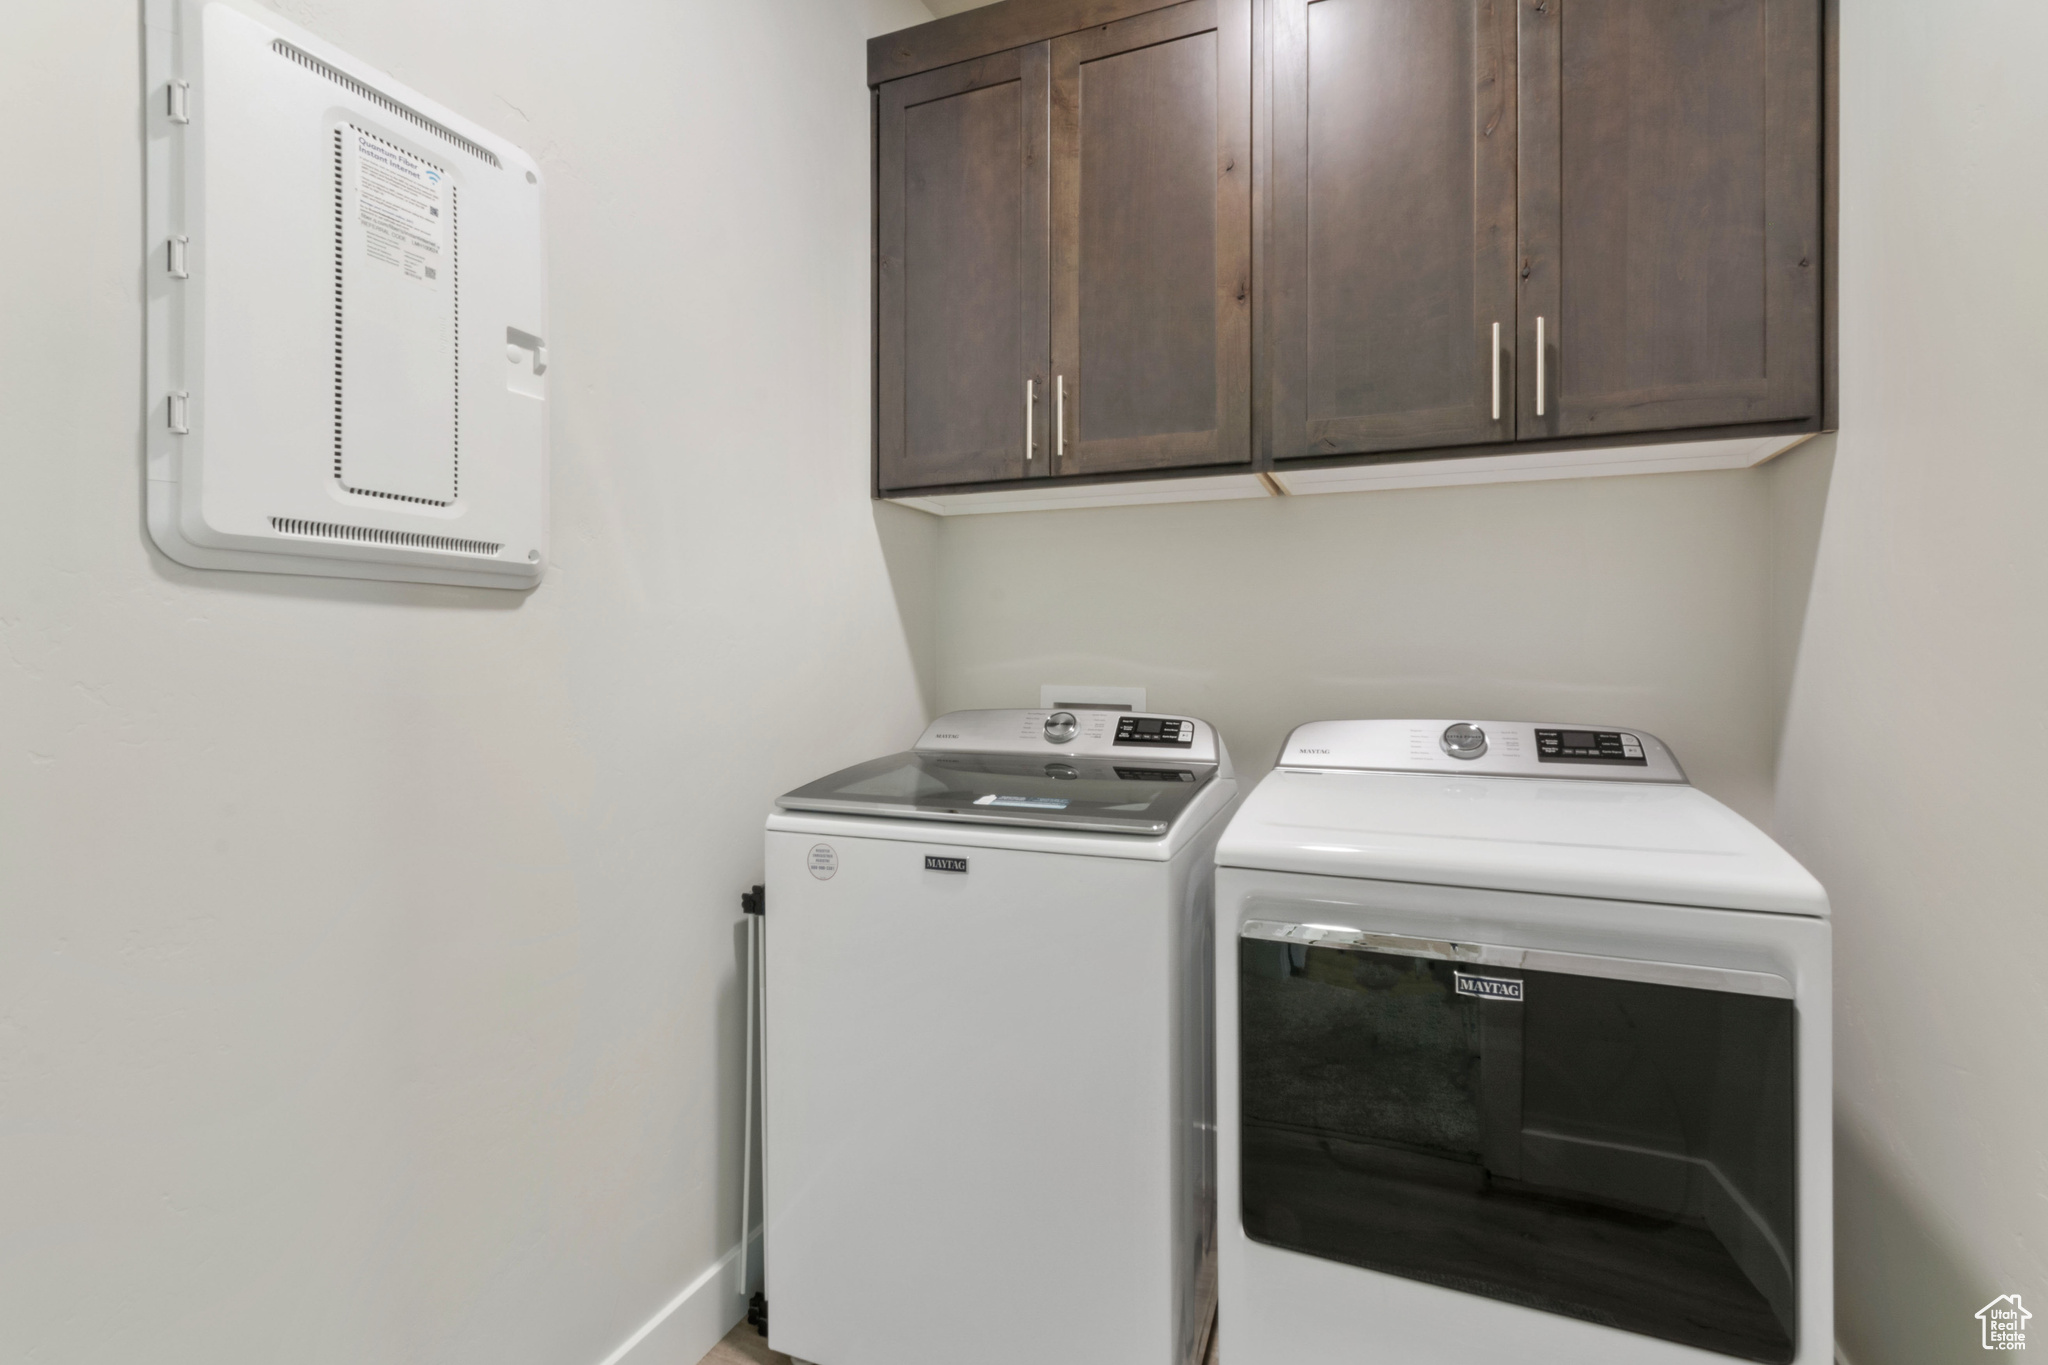 Laundry area with cabinets and washing machine and dryer